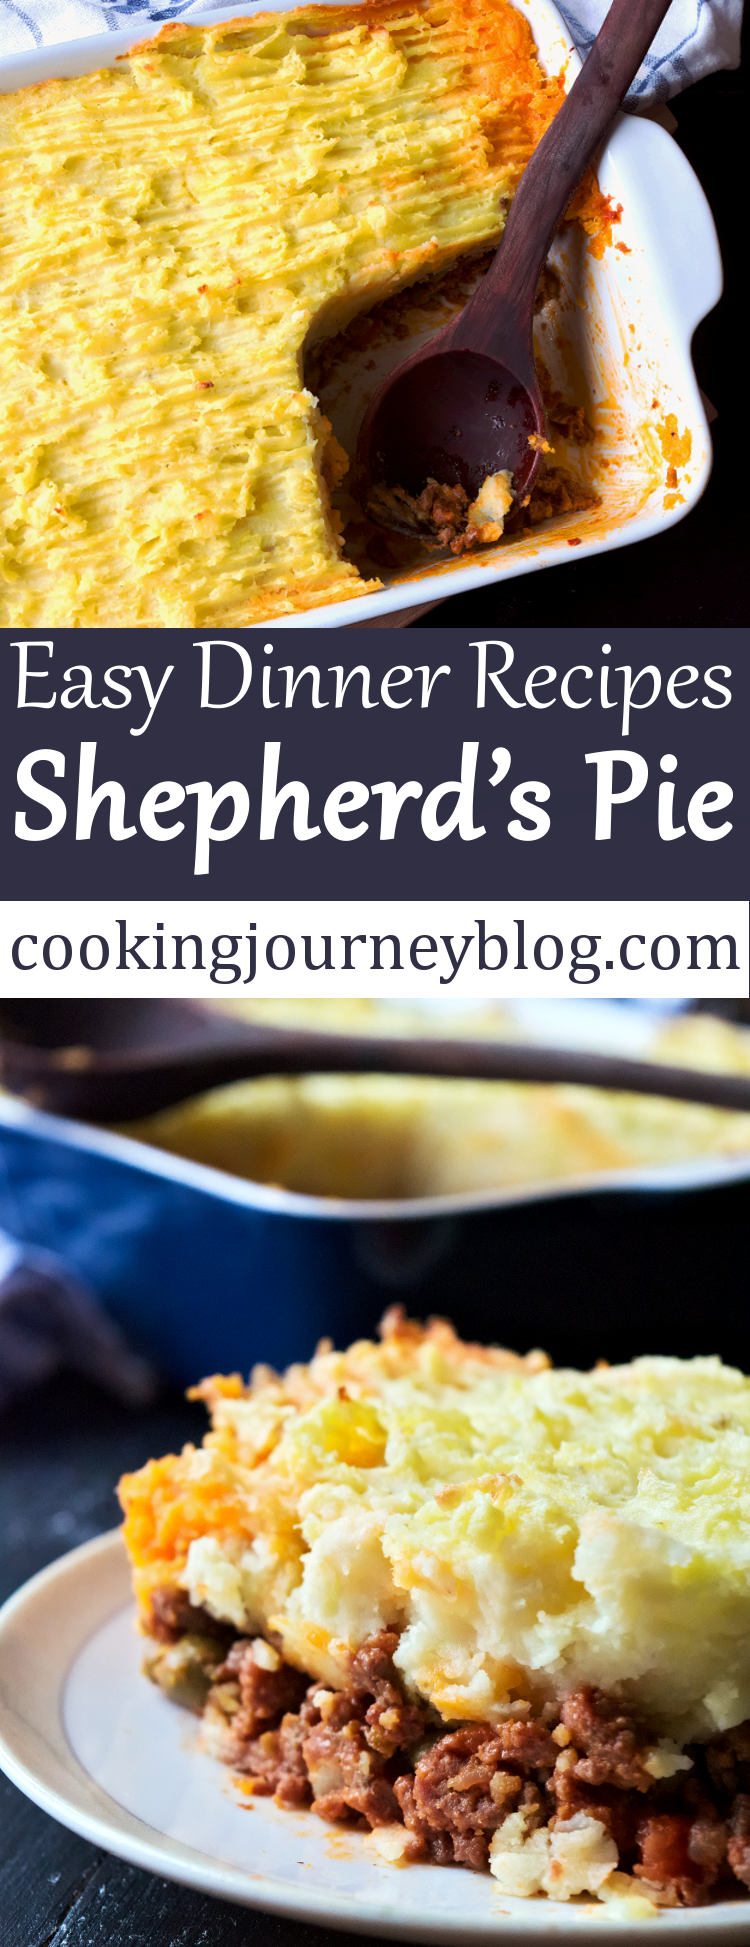 Shepherd's pie is a classic British dish that any one should try at least once in a lifetime! This Shepherd's pie has layers of beef and lamb, vegetables, covered with potato mash. Wonder what to cook for dinner? Try this simple and filling meat pie. Turn meat and potatoes into one of your dinners!